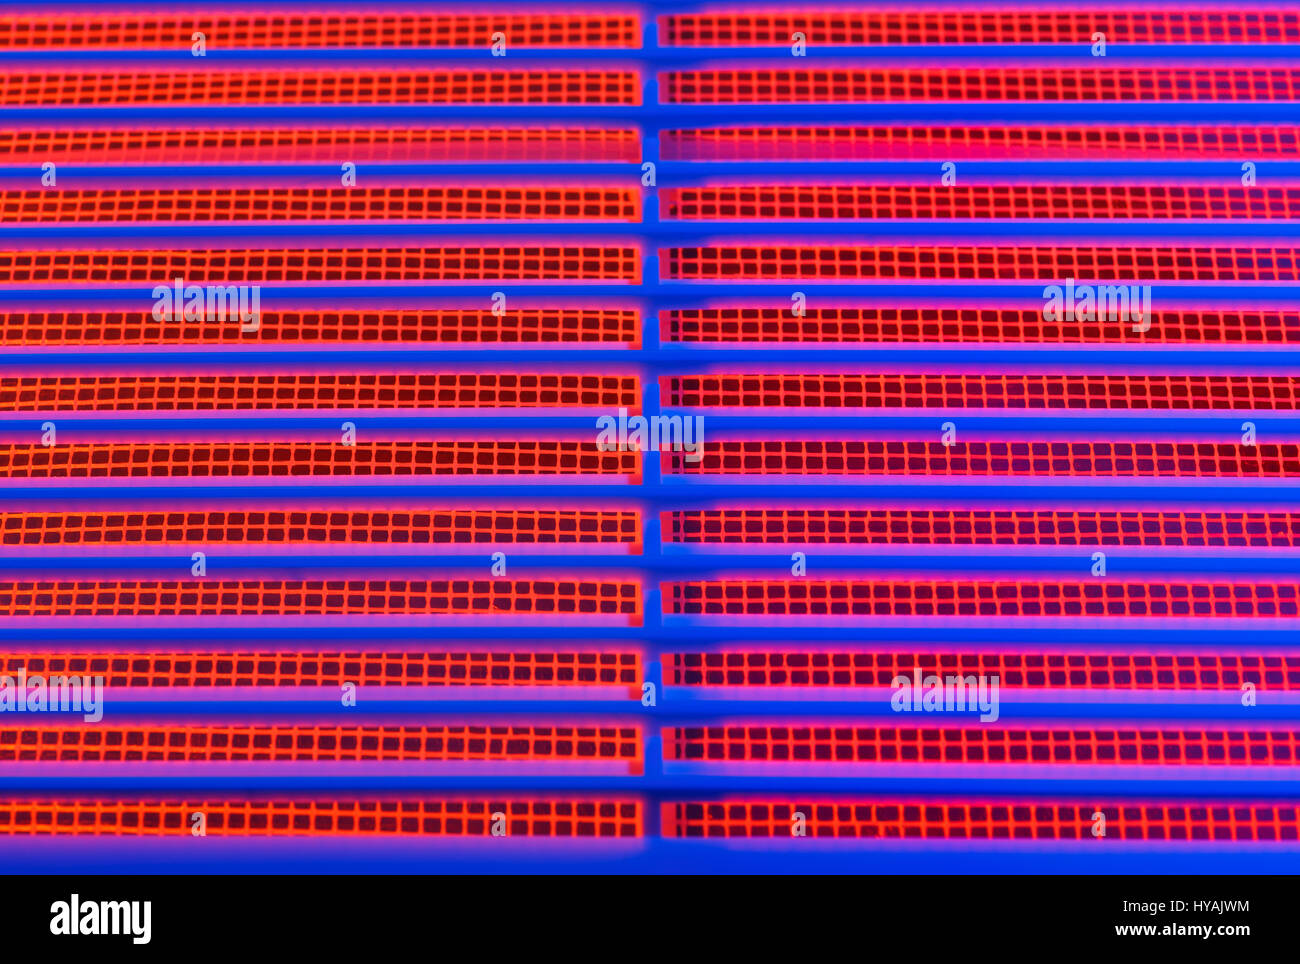 Abstract image of a part of the ventilation grill with a blue and red illumination. Stock Photo